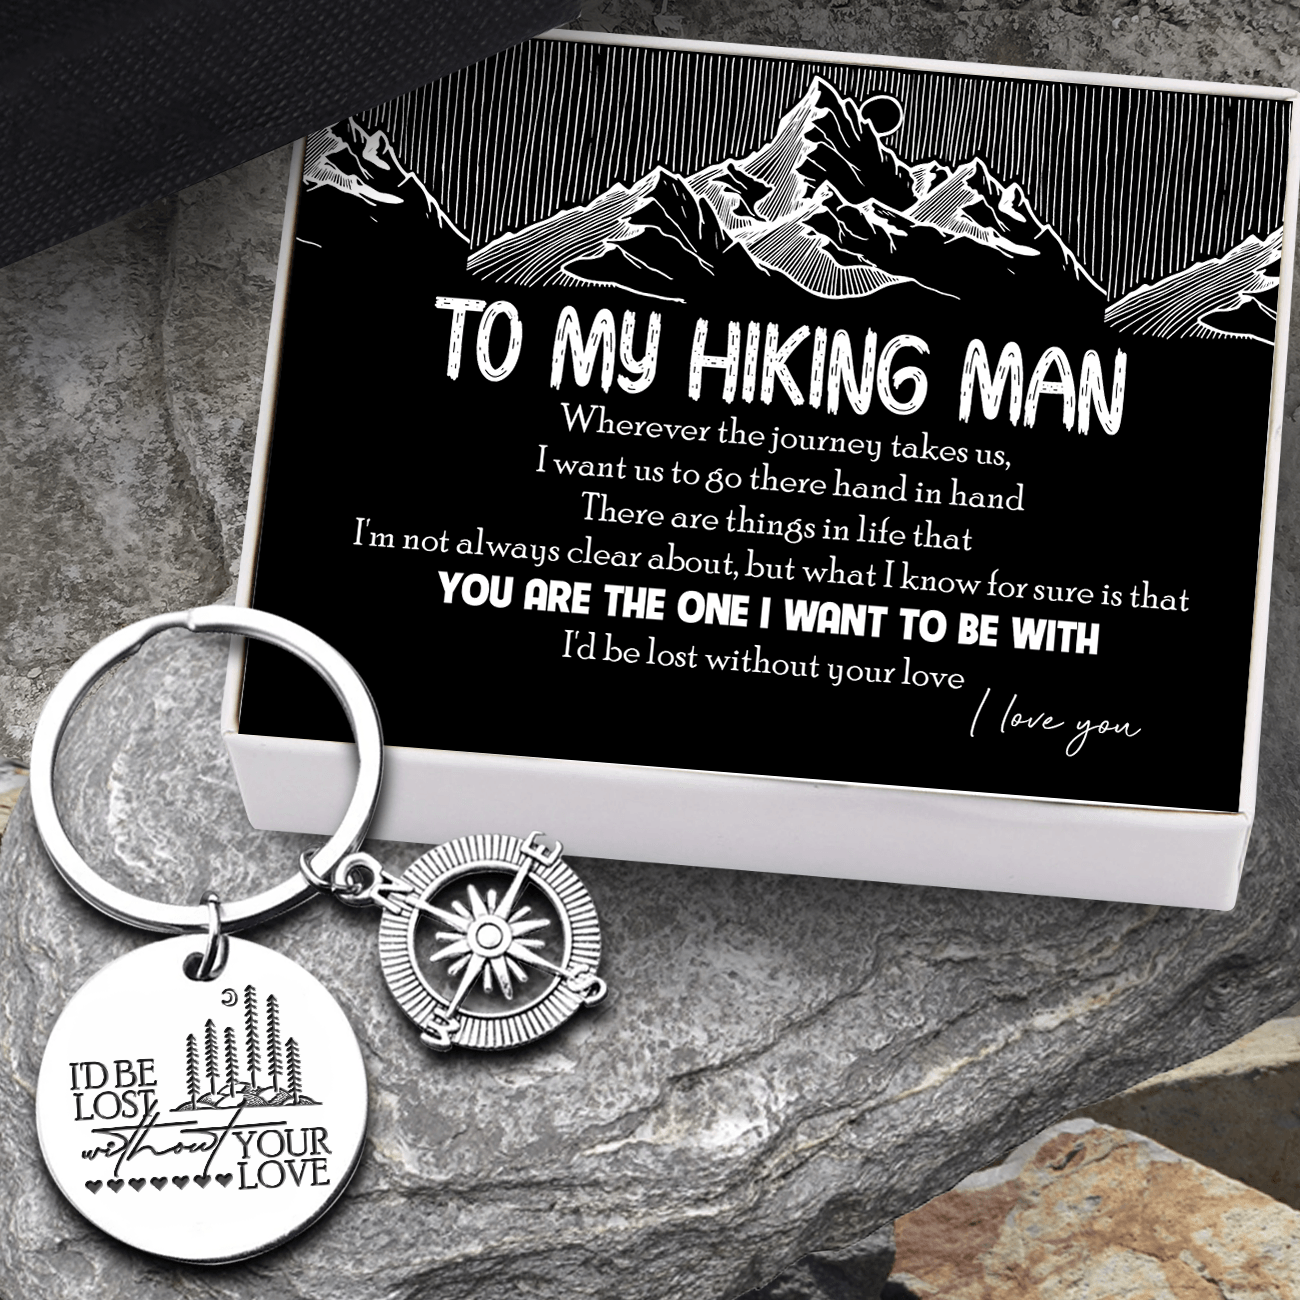 Compass Keychain - Hiking - To My Man - I'd Be Lost Without Your Love - Augkw26019 - Gifts Holder